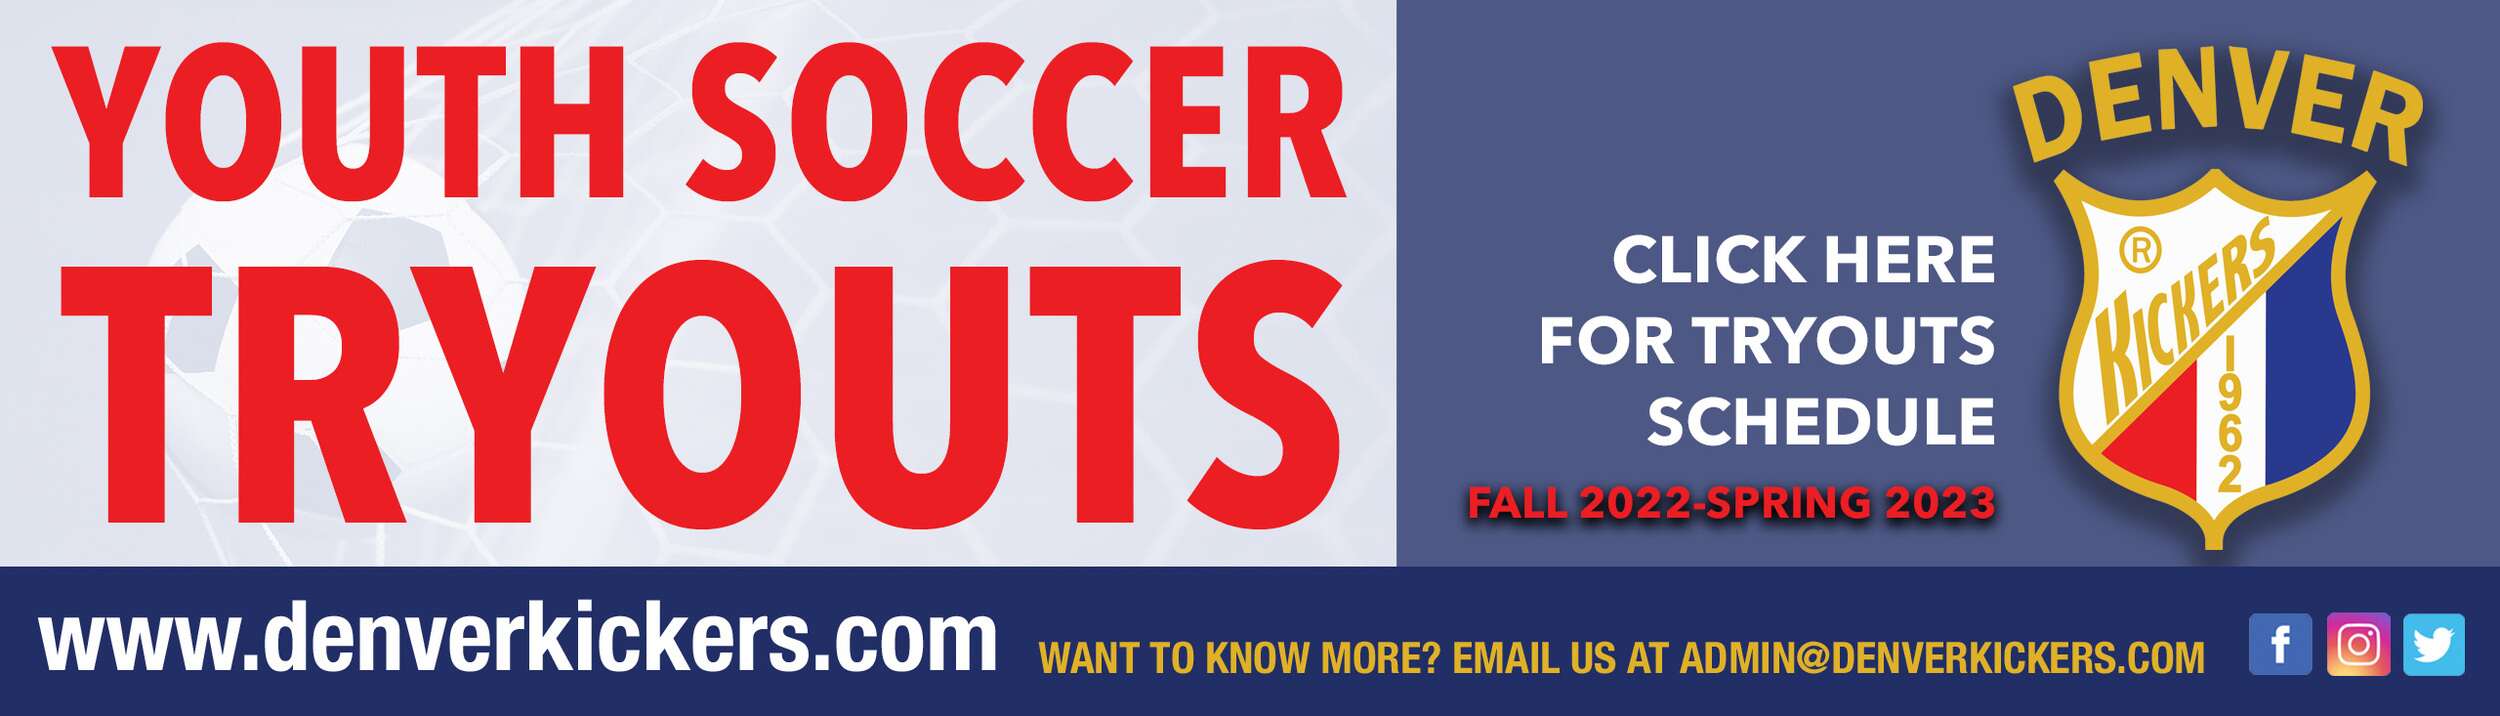 youth soccer tryouts